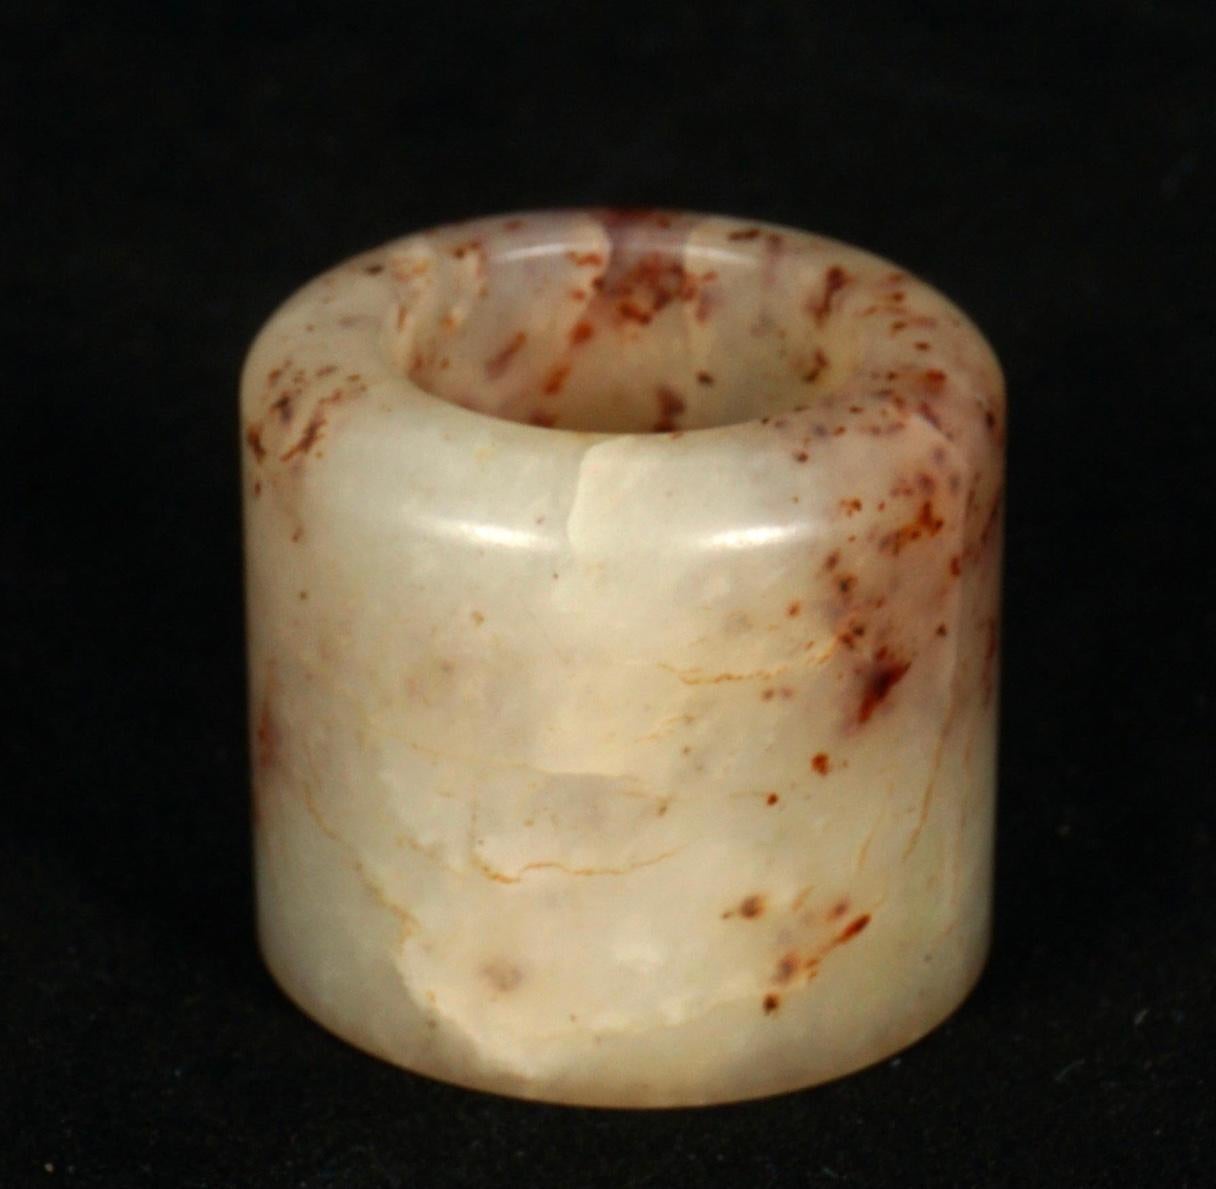 Nicely colored jade Chinese archer ring that feel oh-so-soft, heavy and cold to the touch. Jade archer rings with very soft hand polished finish that is carved from a pale brown jade with darker inclusions and matrix. Well rounded edges with carved